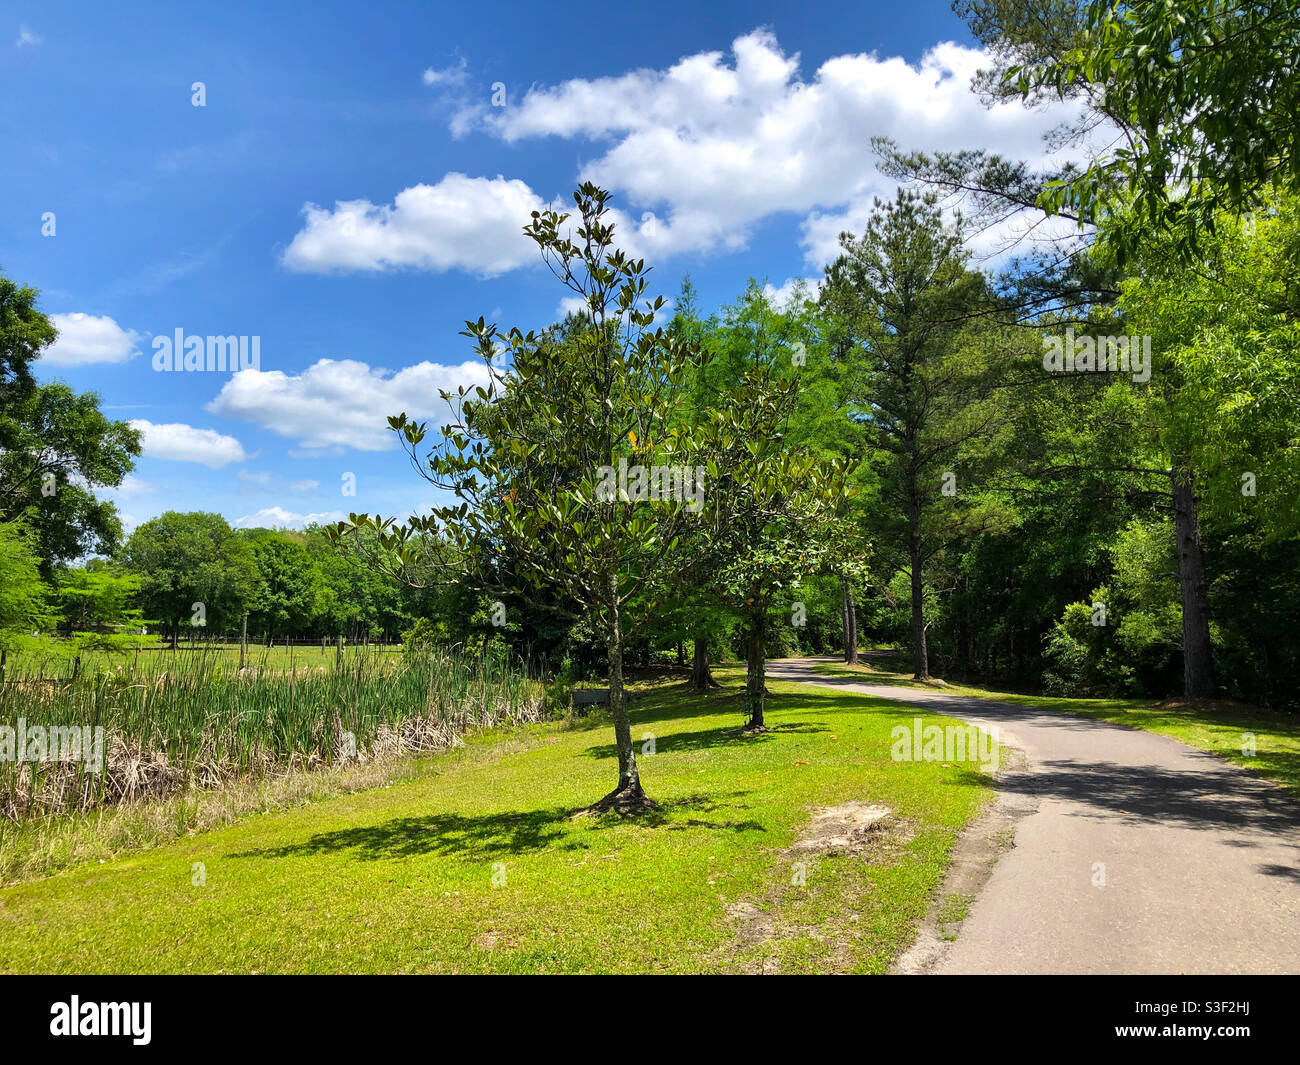 A rural scene on the bicycle trail at Baldwin Florida, near Jacksonville. Stock Photo